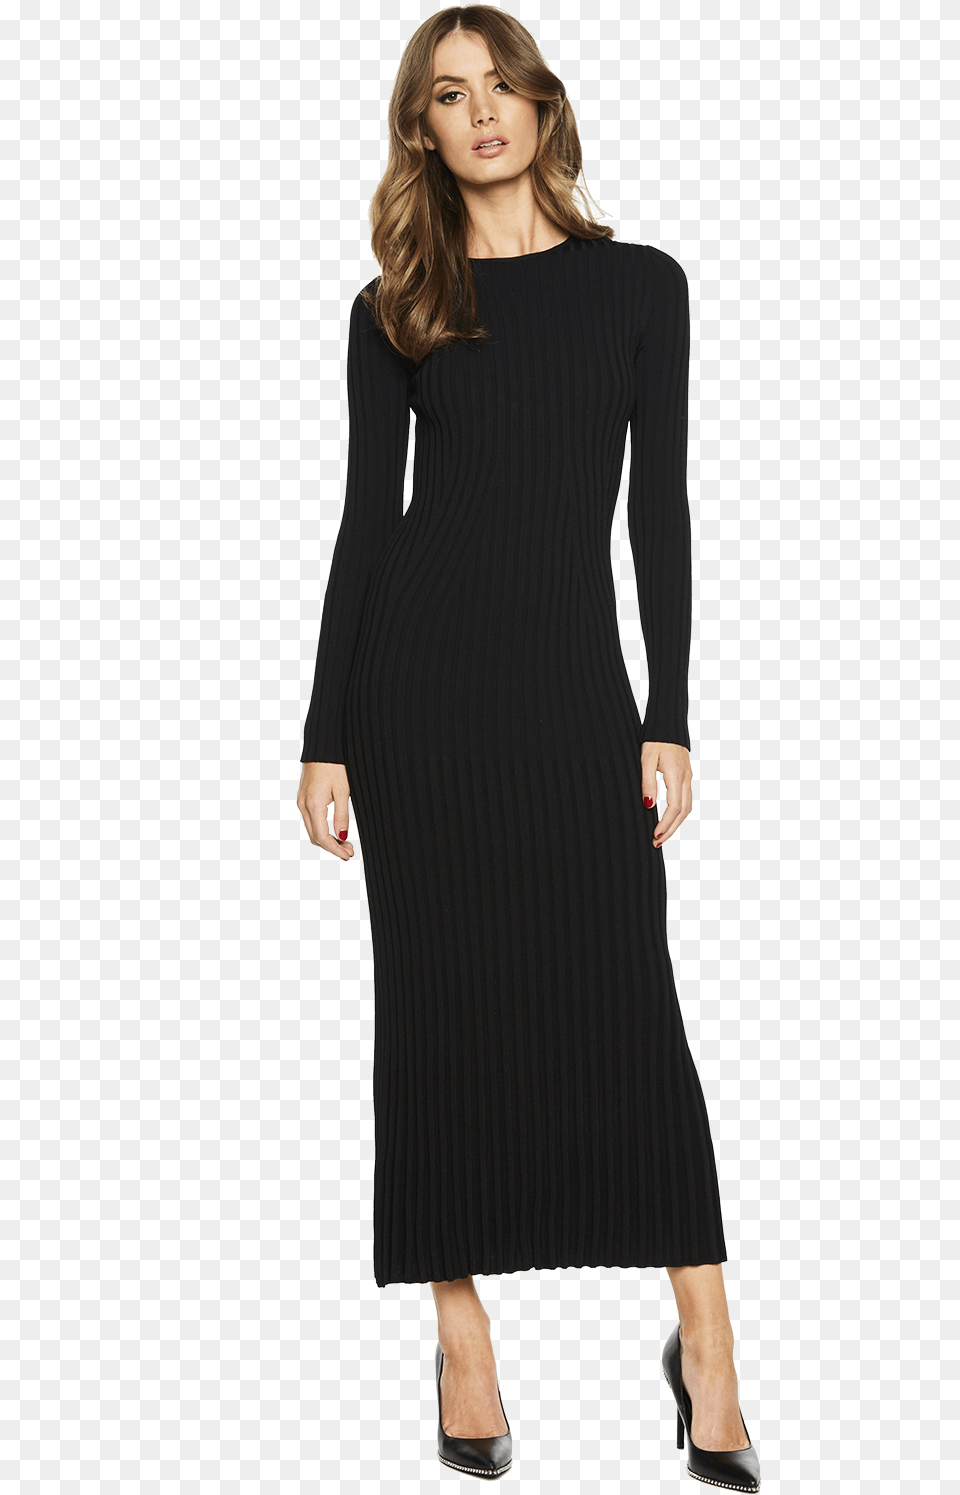 Low Back Rib Dress In Colour Caviar Tiare Hawaii Cheyenne Dress, Adult, Sleeve, Person, Long Sleeve Free Transparent Png